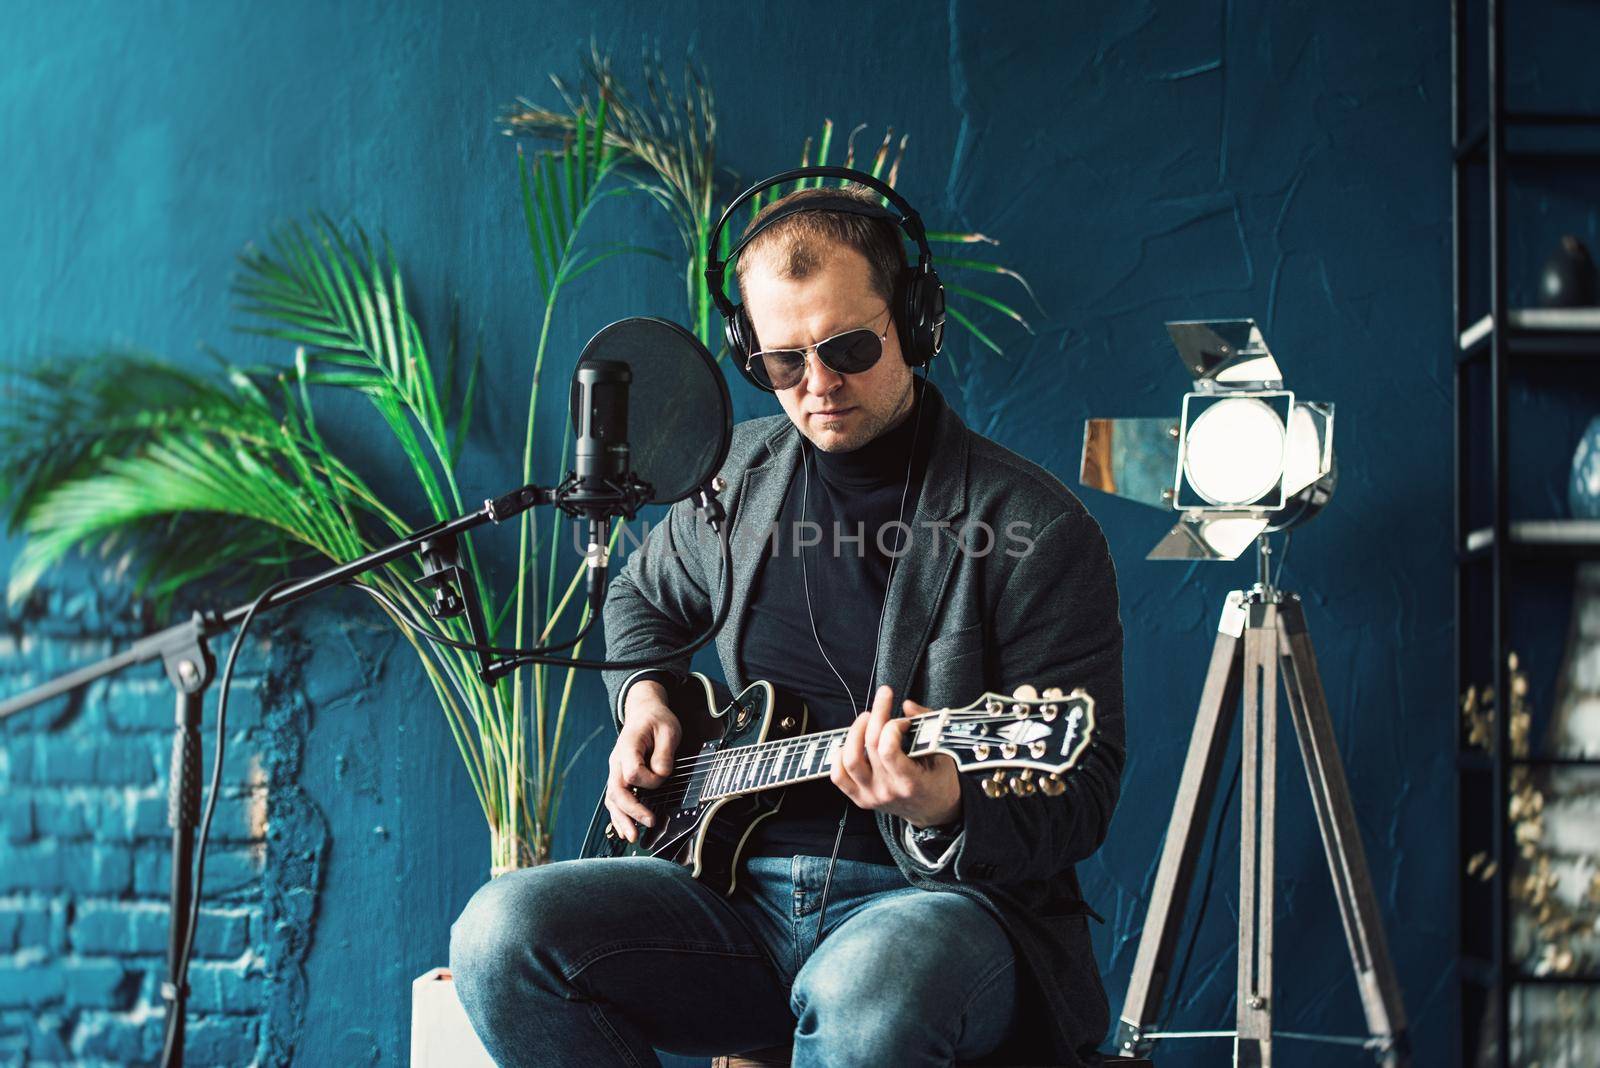 Close up of a man singer in a headphones with a guitar recording a track in a home studio. Man wearing sunglasses, jeans, black shirt and a jacket.